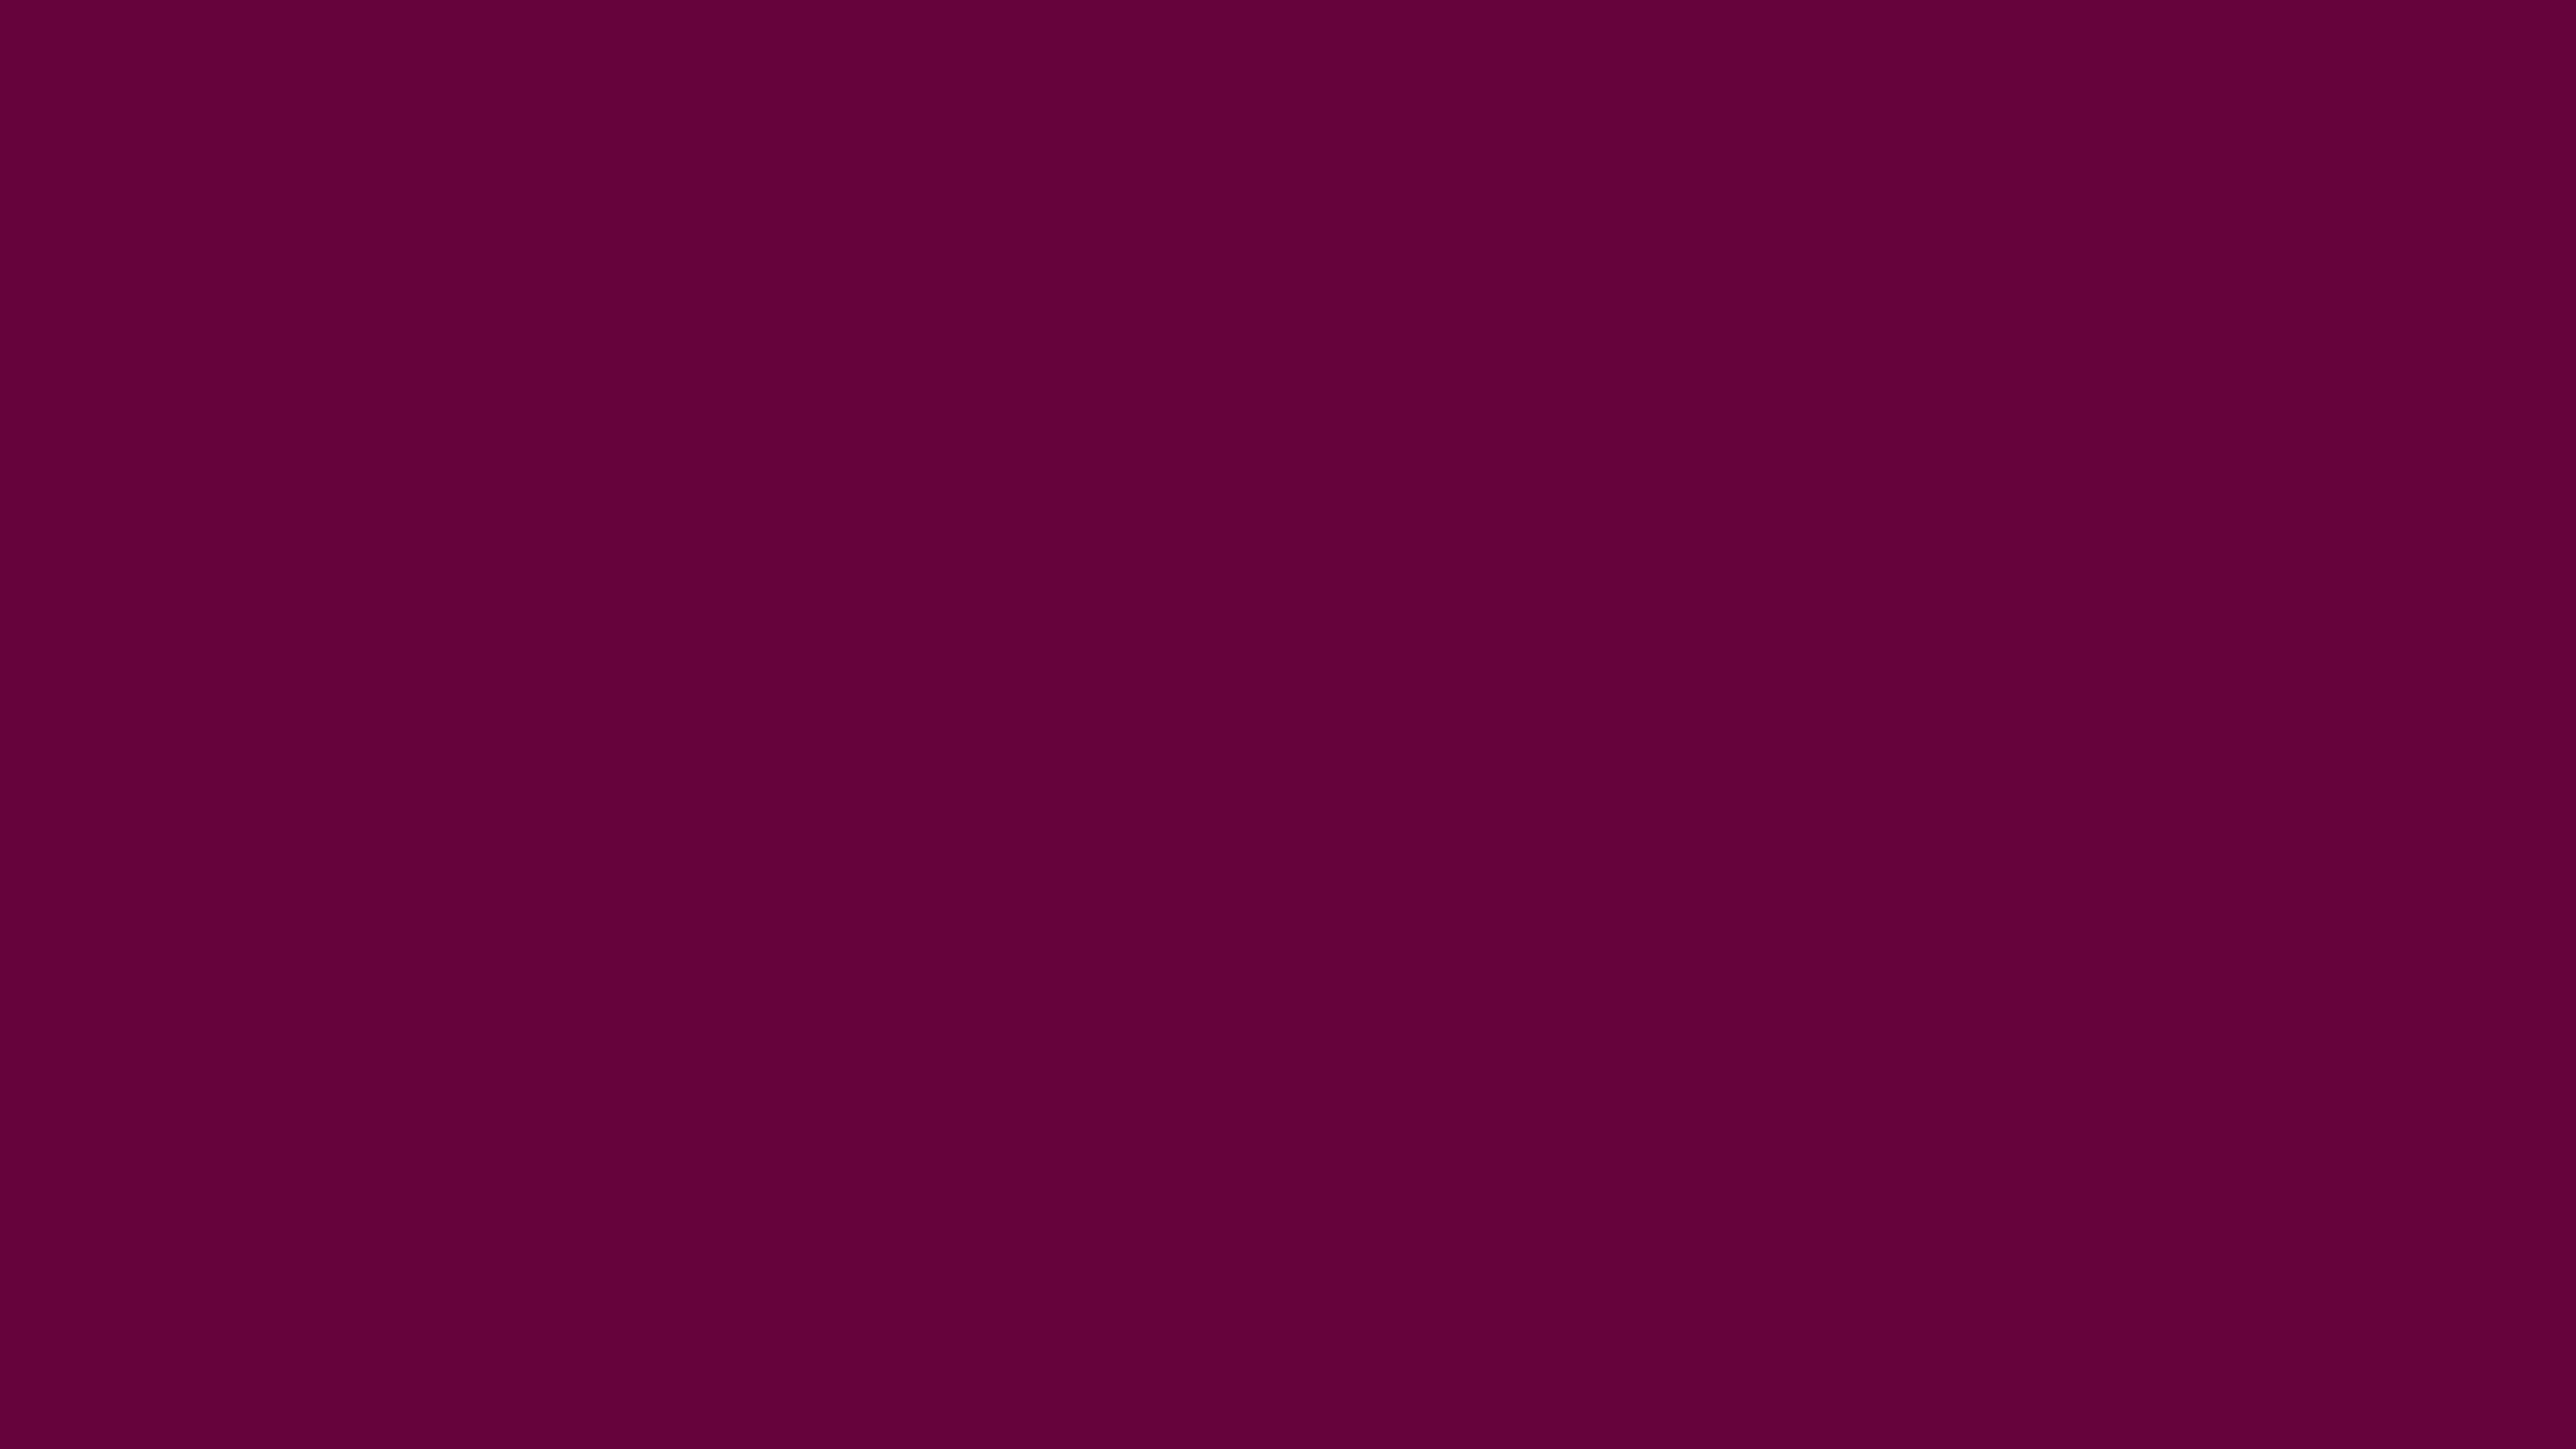 4096x2304 Imperial Purple Solid Color Background